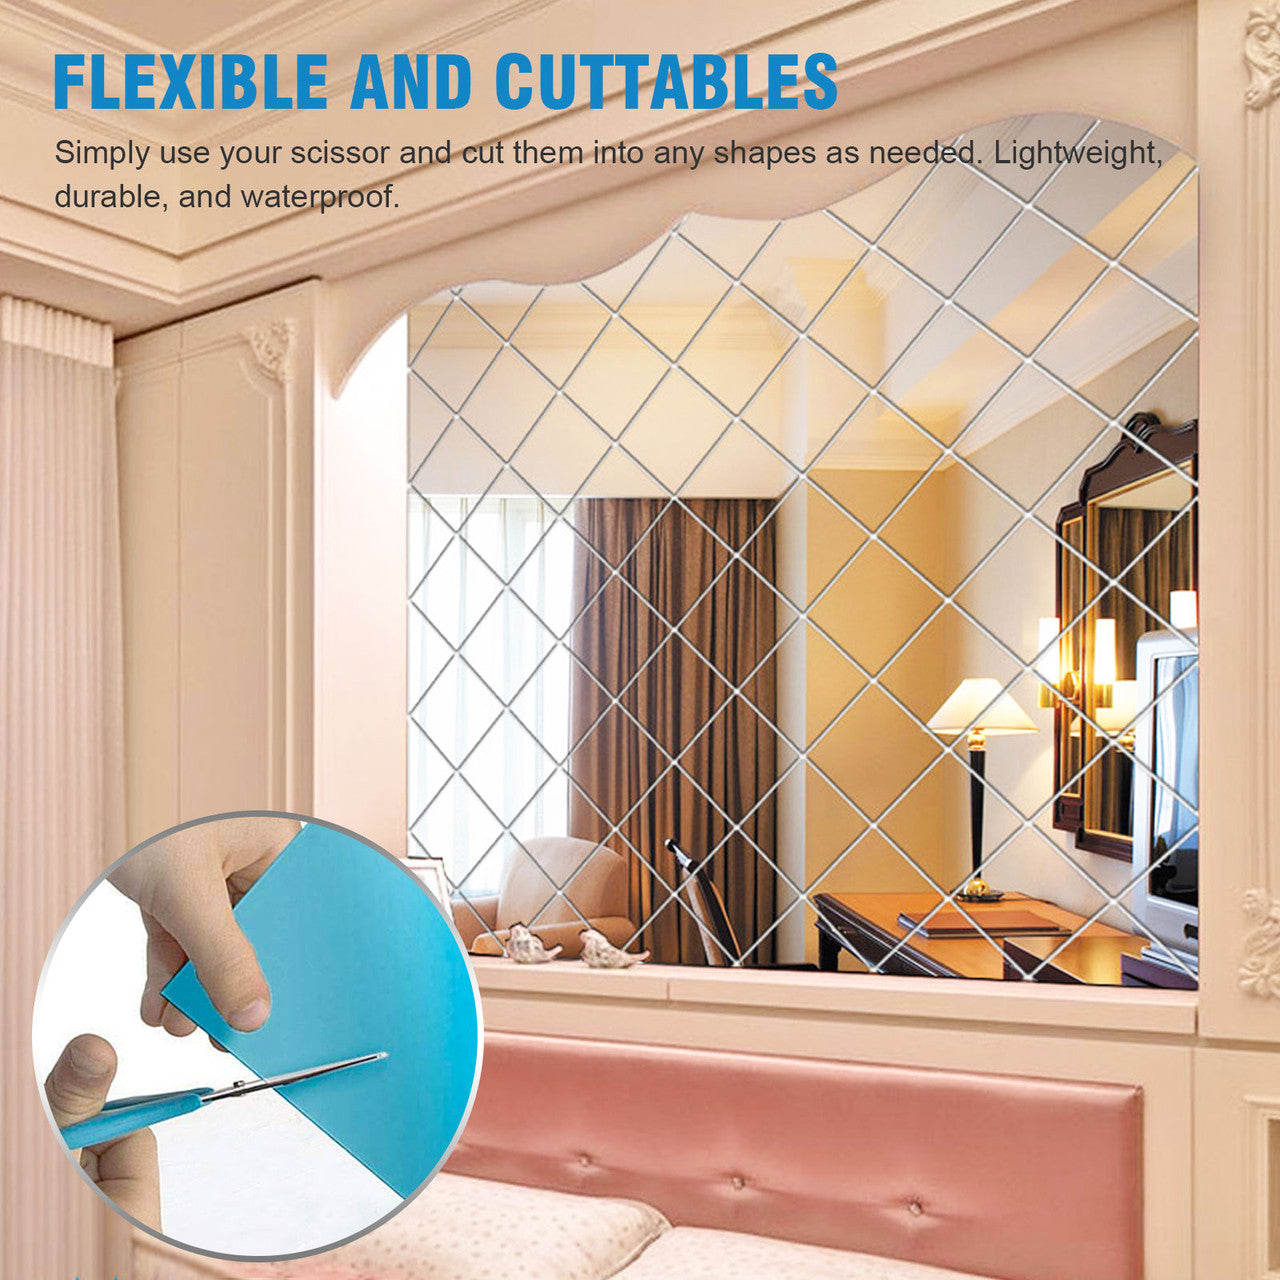 Self-Adhesive Mirror Sheets, Flexible Mirror Wall Stickers, Soft Non-Glass PET Cuttble DIY Wall Mirror Effect Reflective Sticker for Home Bathroom Bedroom Living Room Safety Decor - 50x100cm